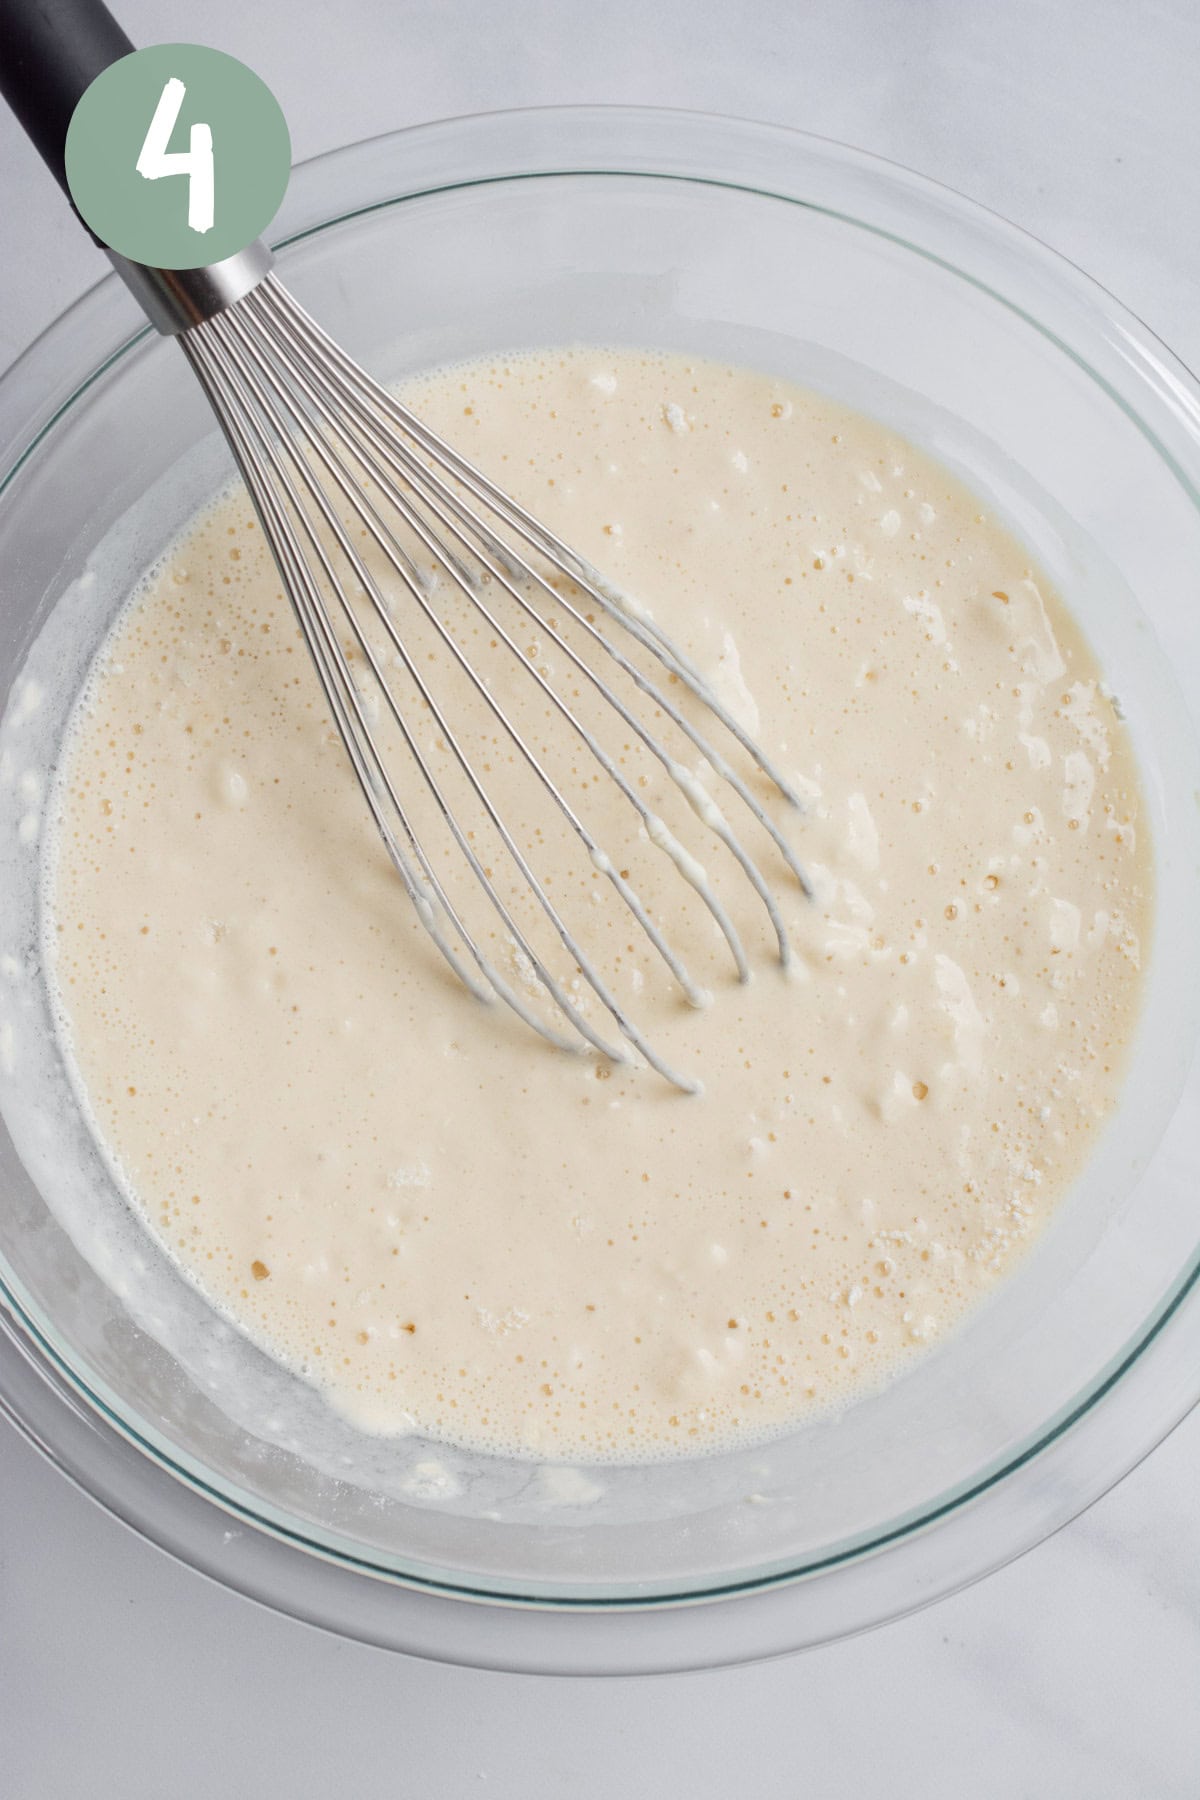 Pancake batter in a glass bowl with a whisk.